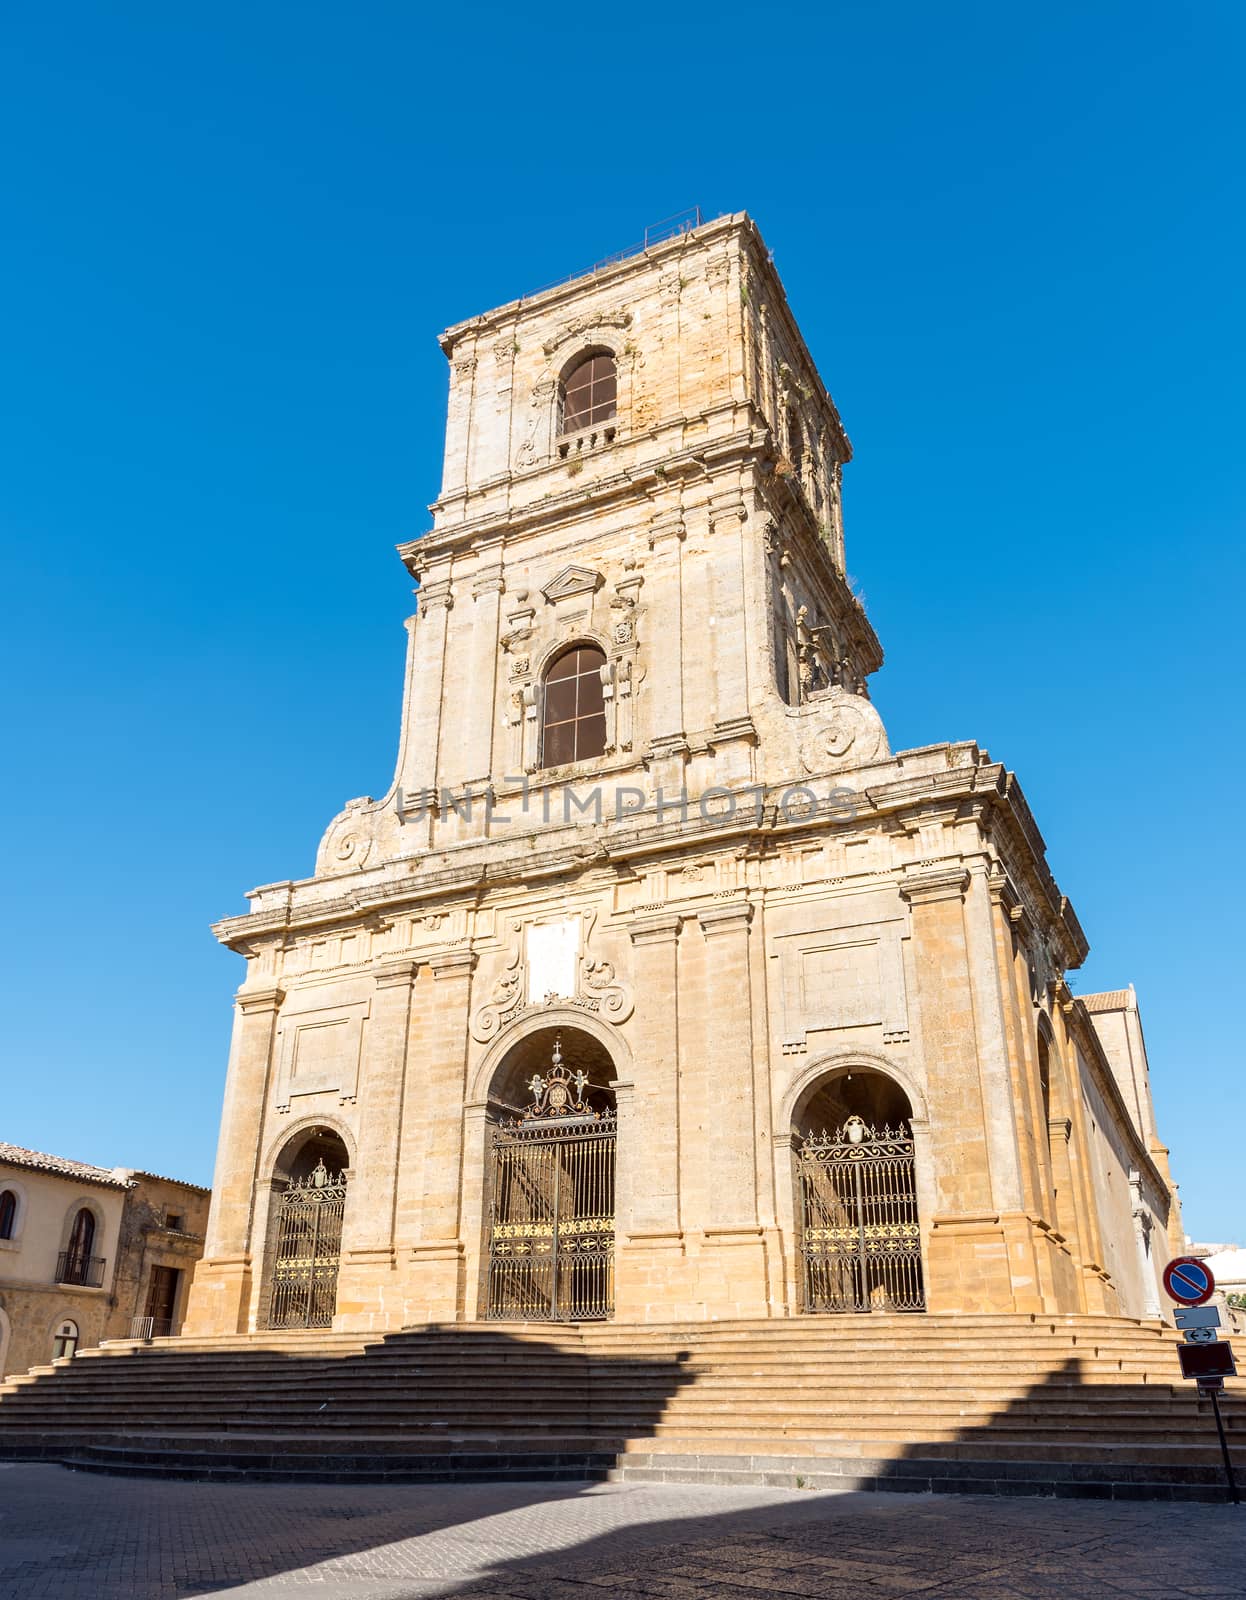 The cathedral of Enna in Sicily, Italy